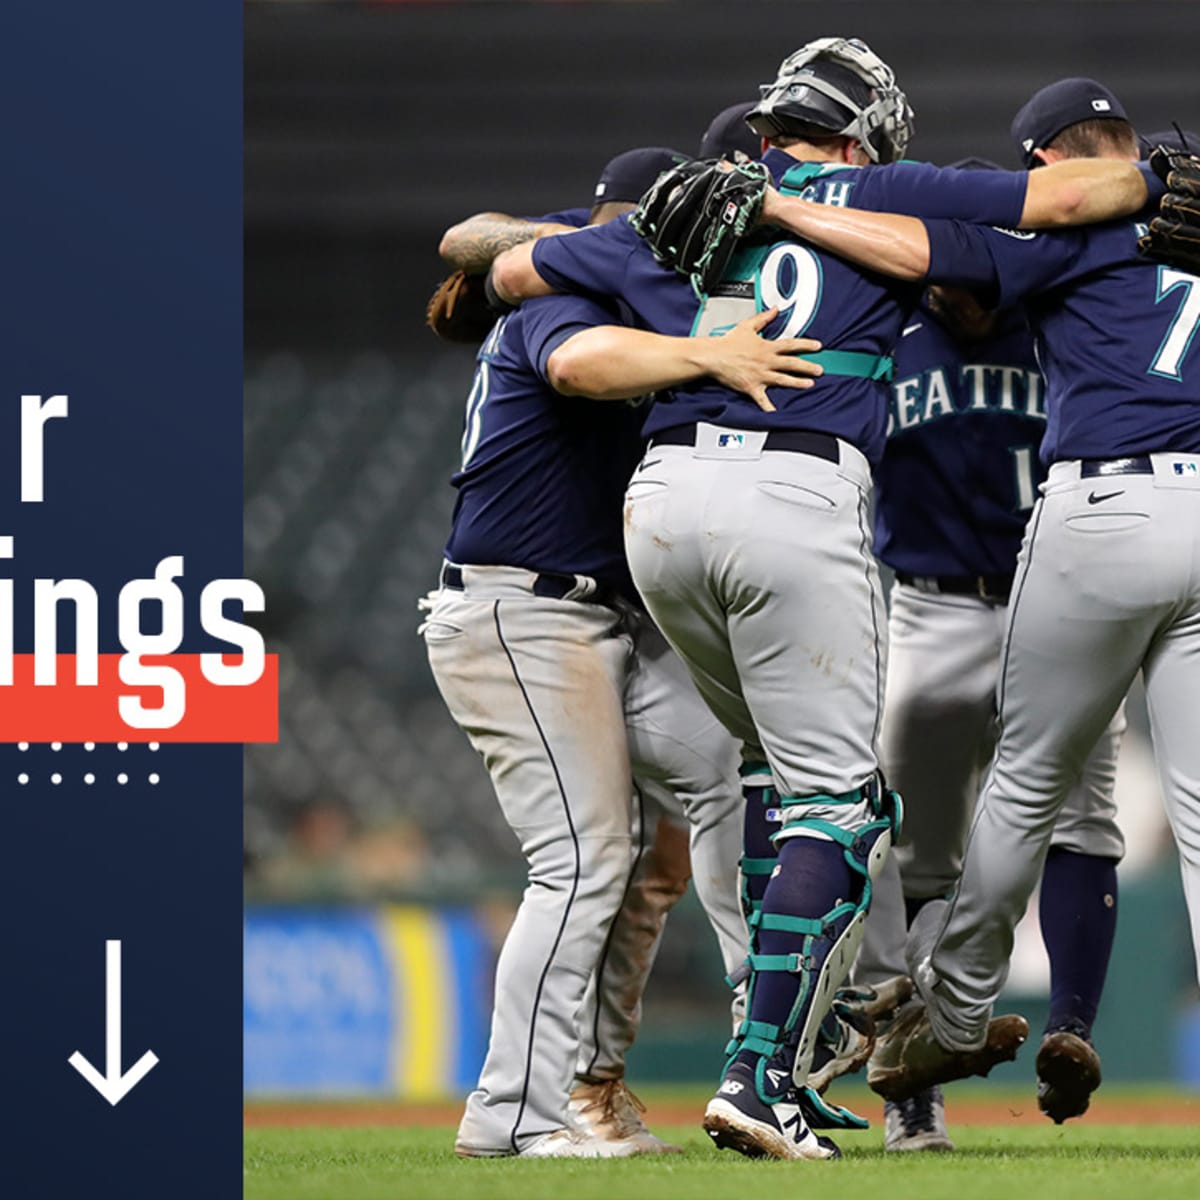 George Kirby matches career high with 10 Ks as Mariners shut out Twins 5-0